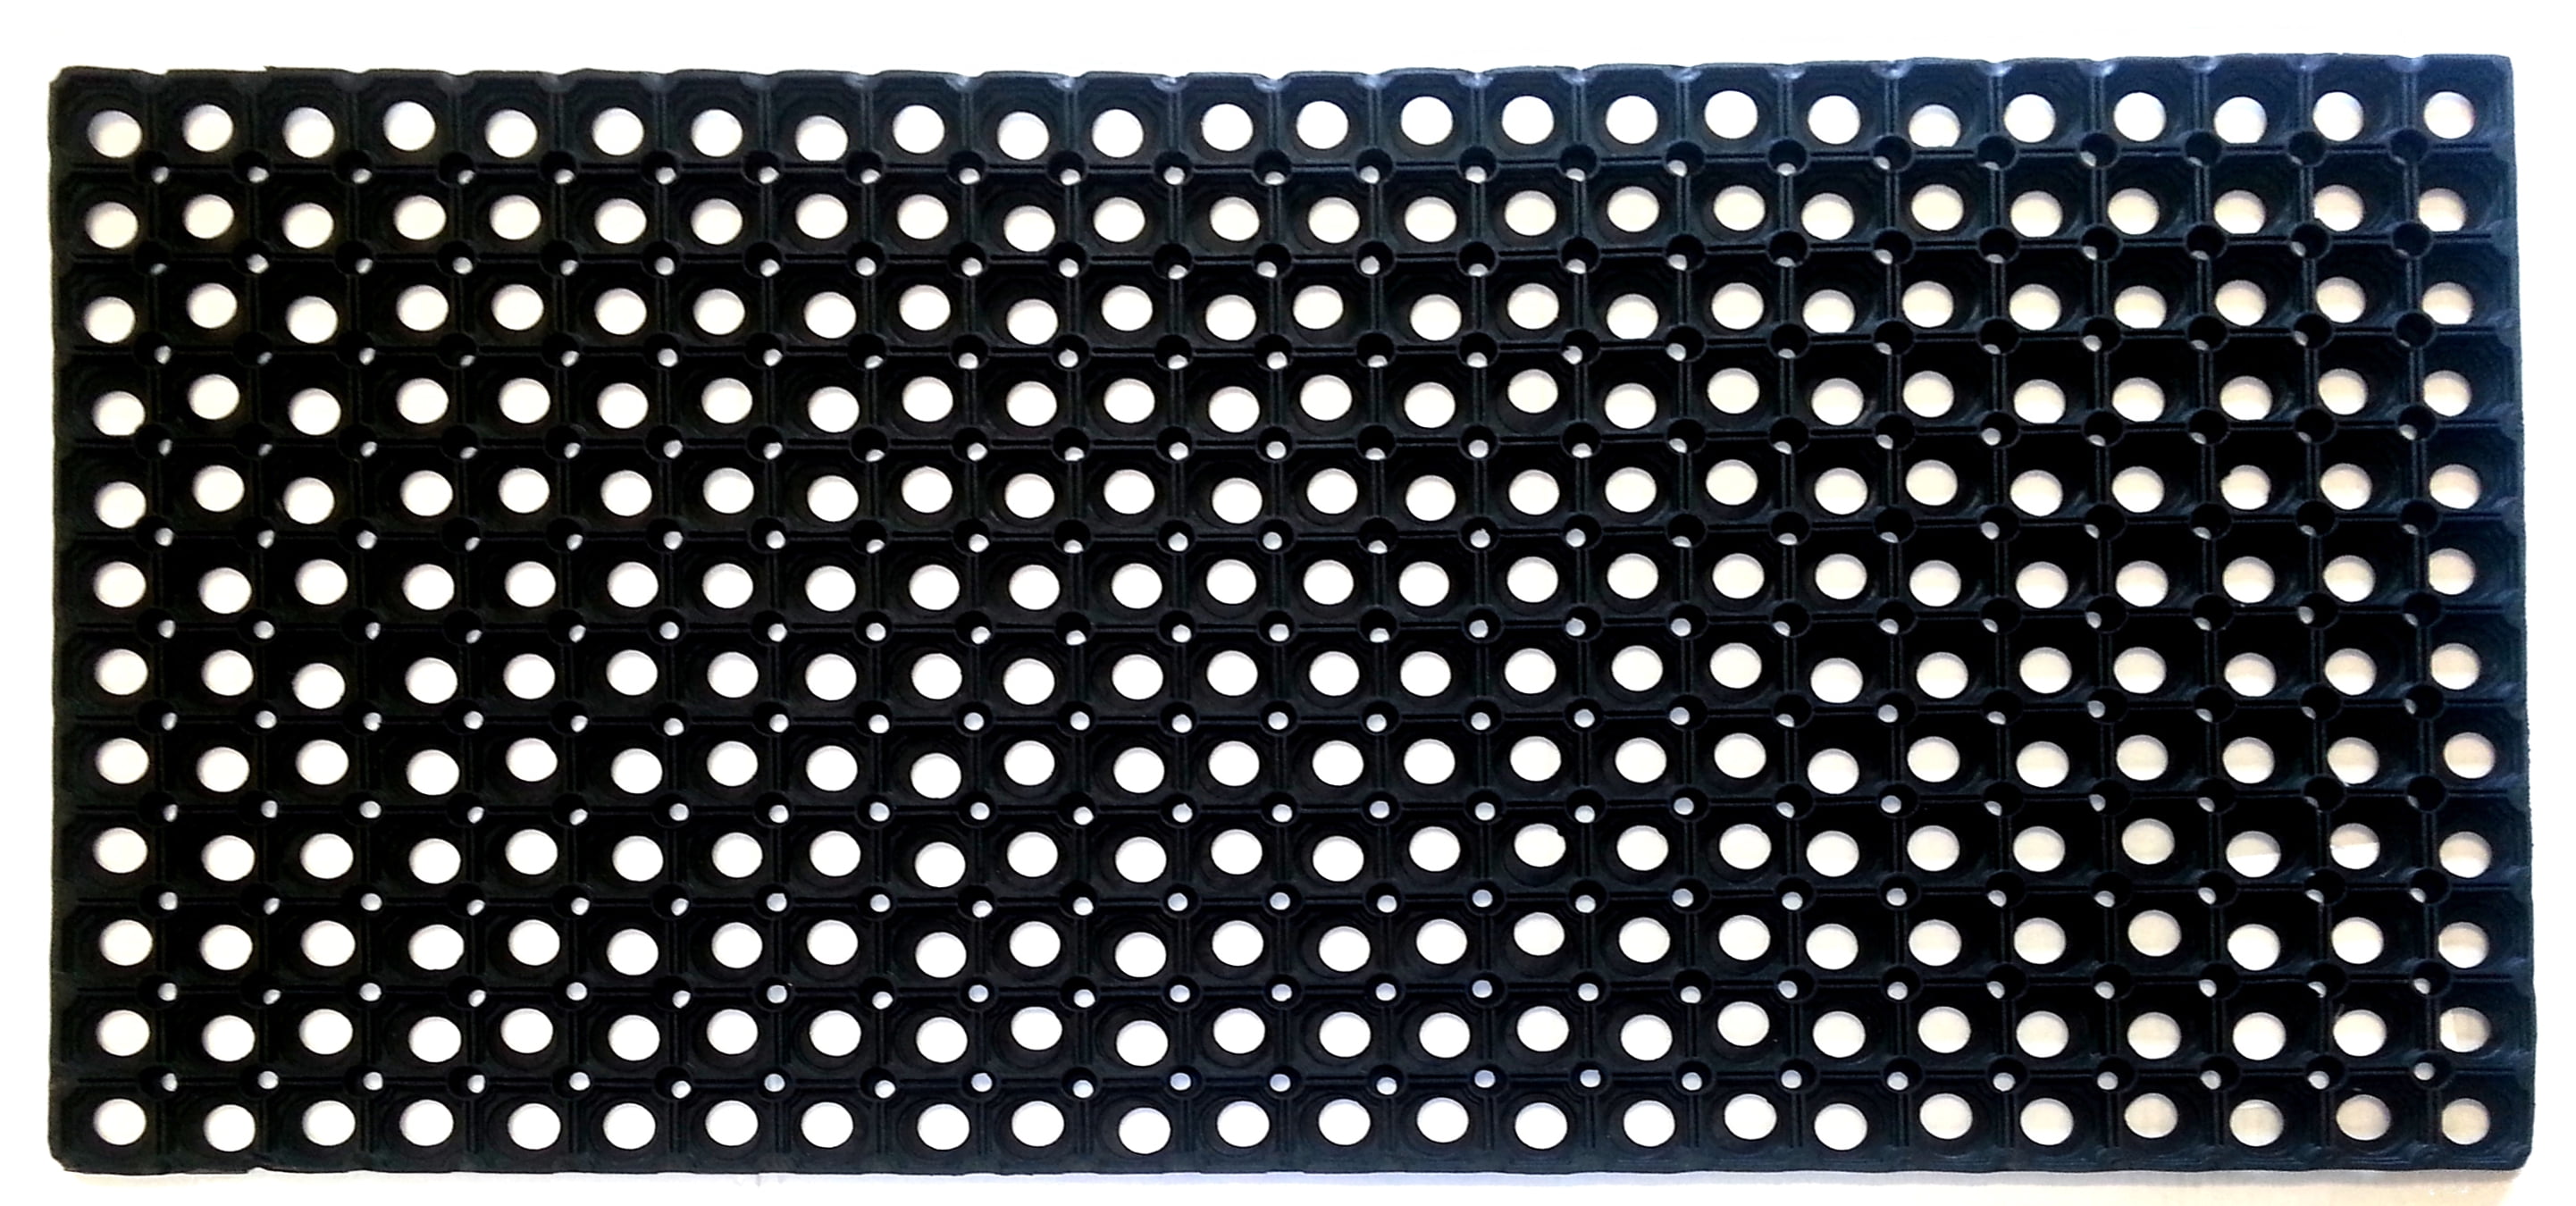 Black Rubber Heavy Duty Mats Hollow Secure Warehouse Outdoor Event Flooring NEW 